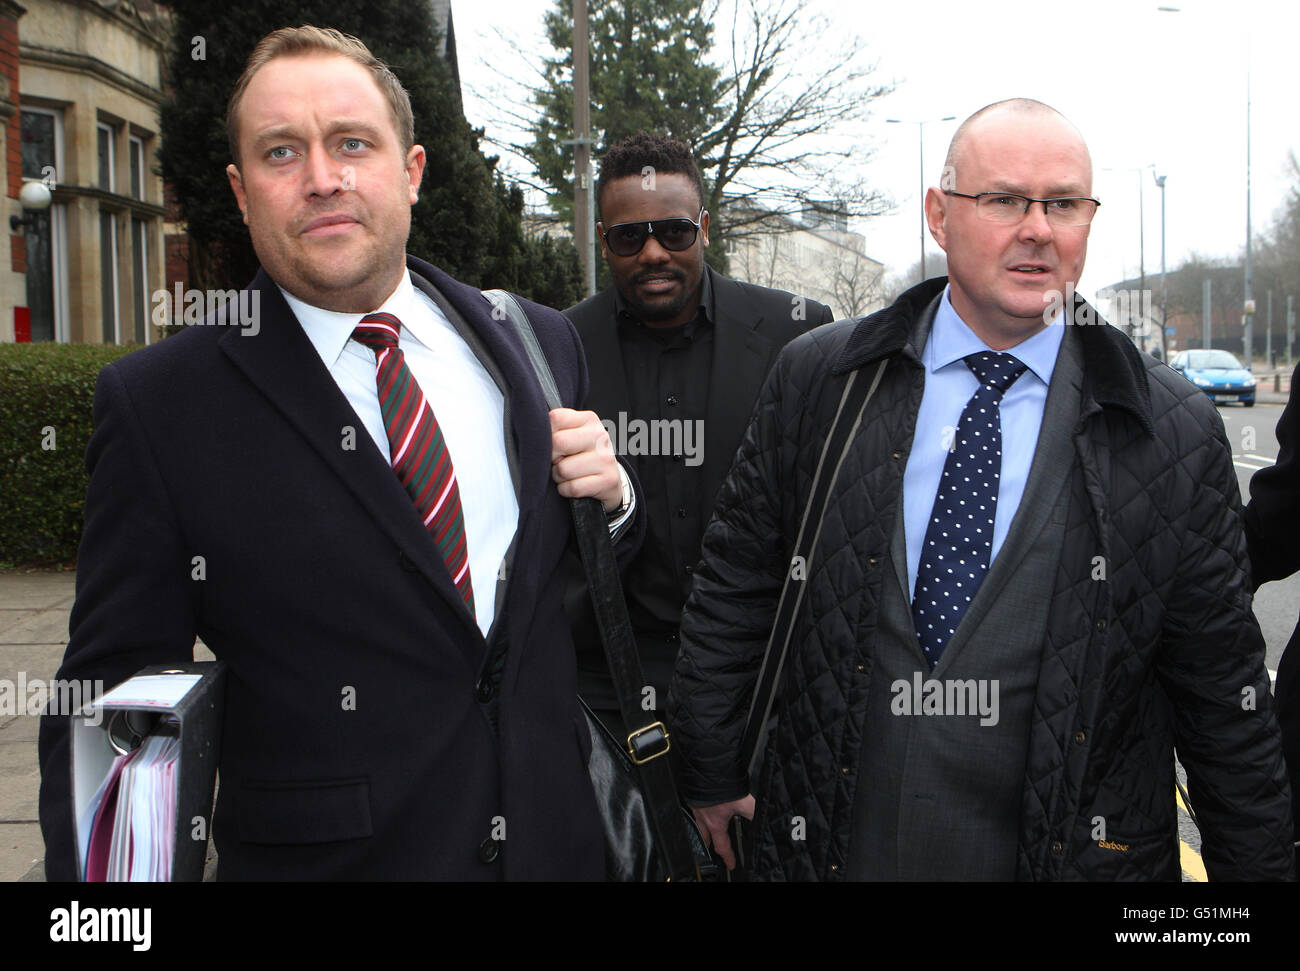 Dereck Chisora arrives at British Boxing Board of Control hearing in Cardiff with Promotor Francis Warren (left) and Andy Ayling both of Frank Warren Promotions at the British Boxing Board of Control, Cardiff. Stock Photo